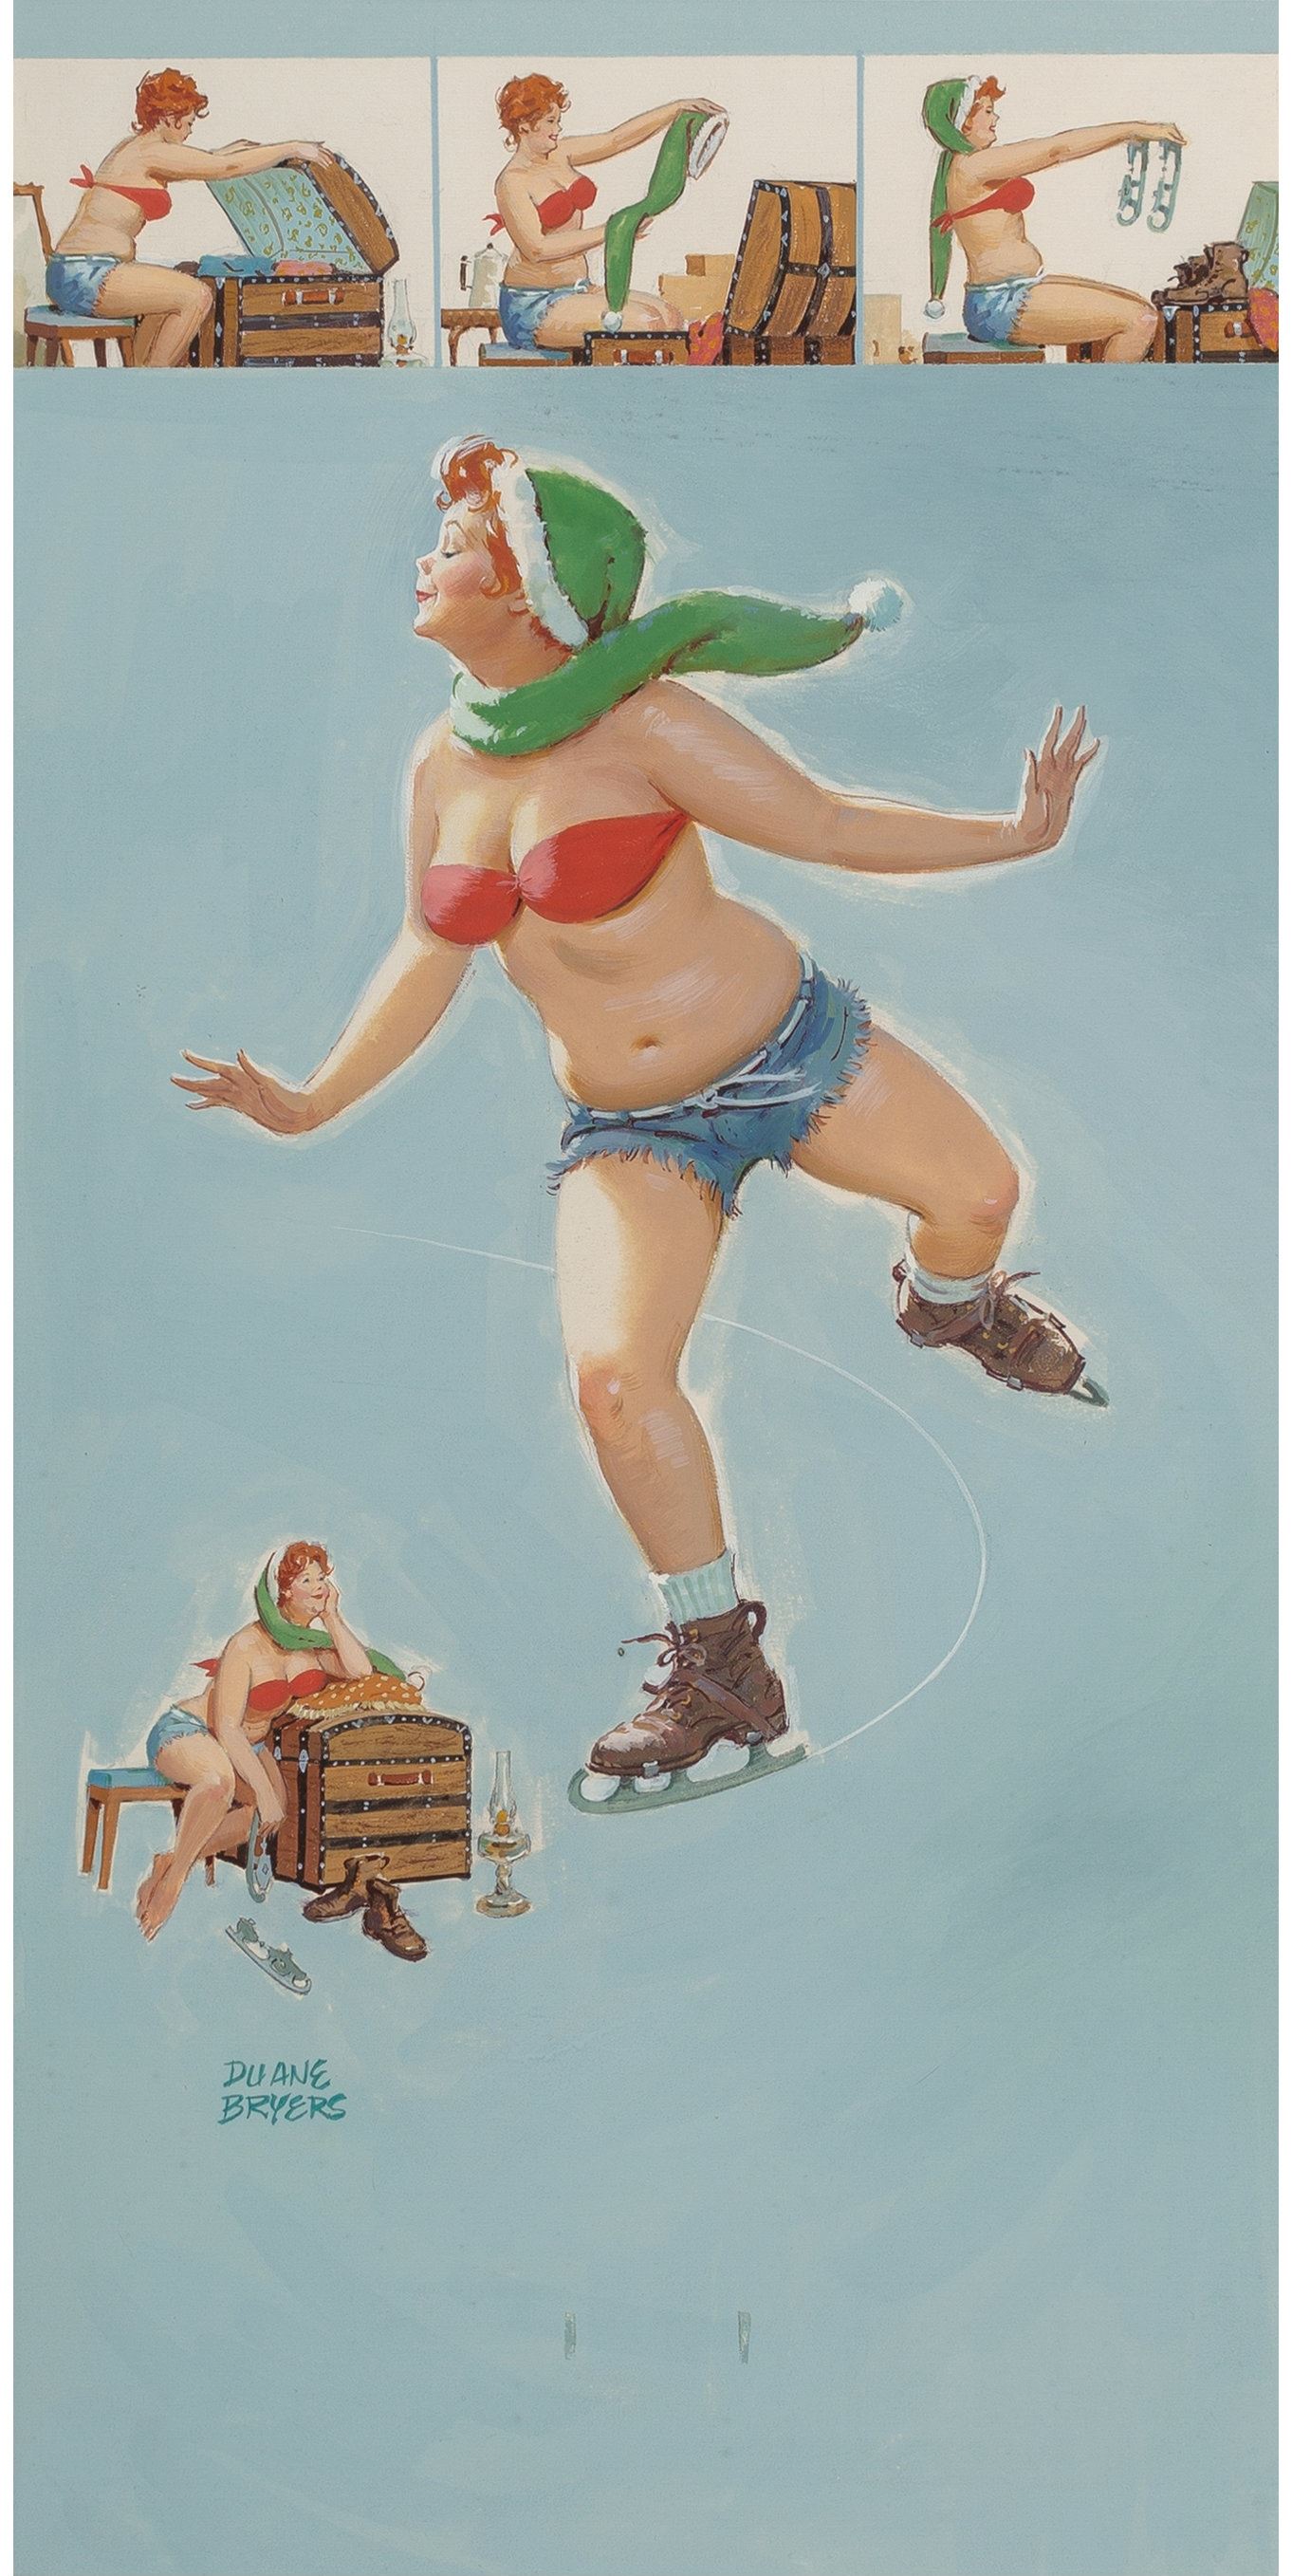 Hilda on Ice, Brown and Bigelow calendar illustration by Duane Bryers